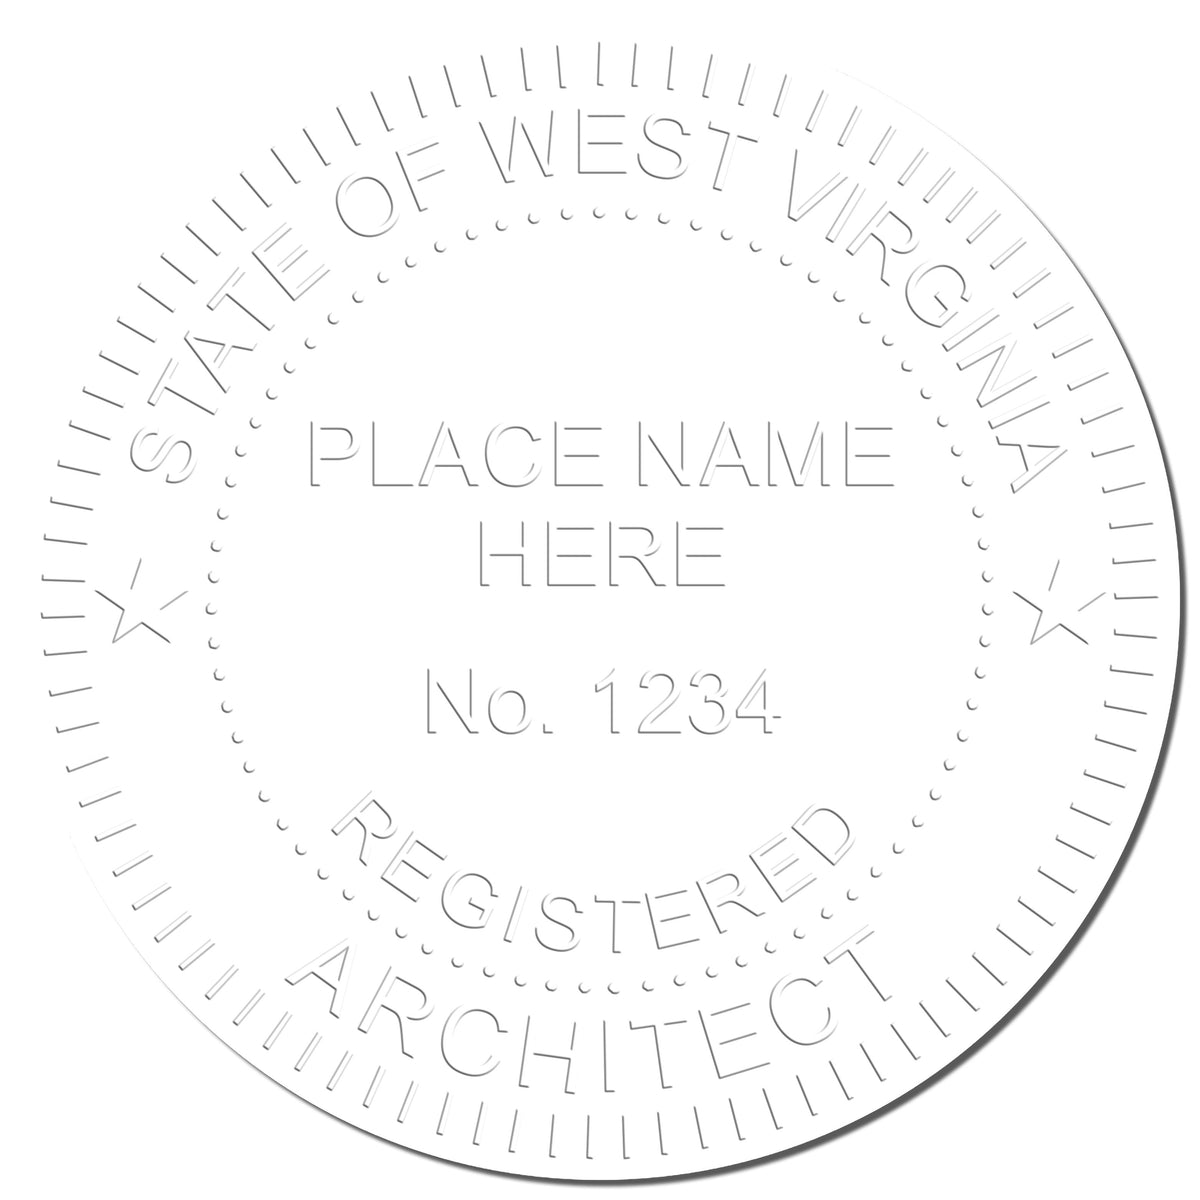 A photograph of the West Virginia Desk Architect Embossing Seal stamp impression reveals a vivid, professional image of the on paper.